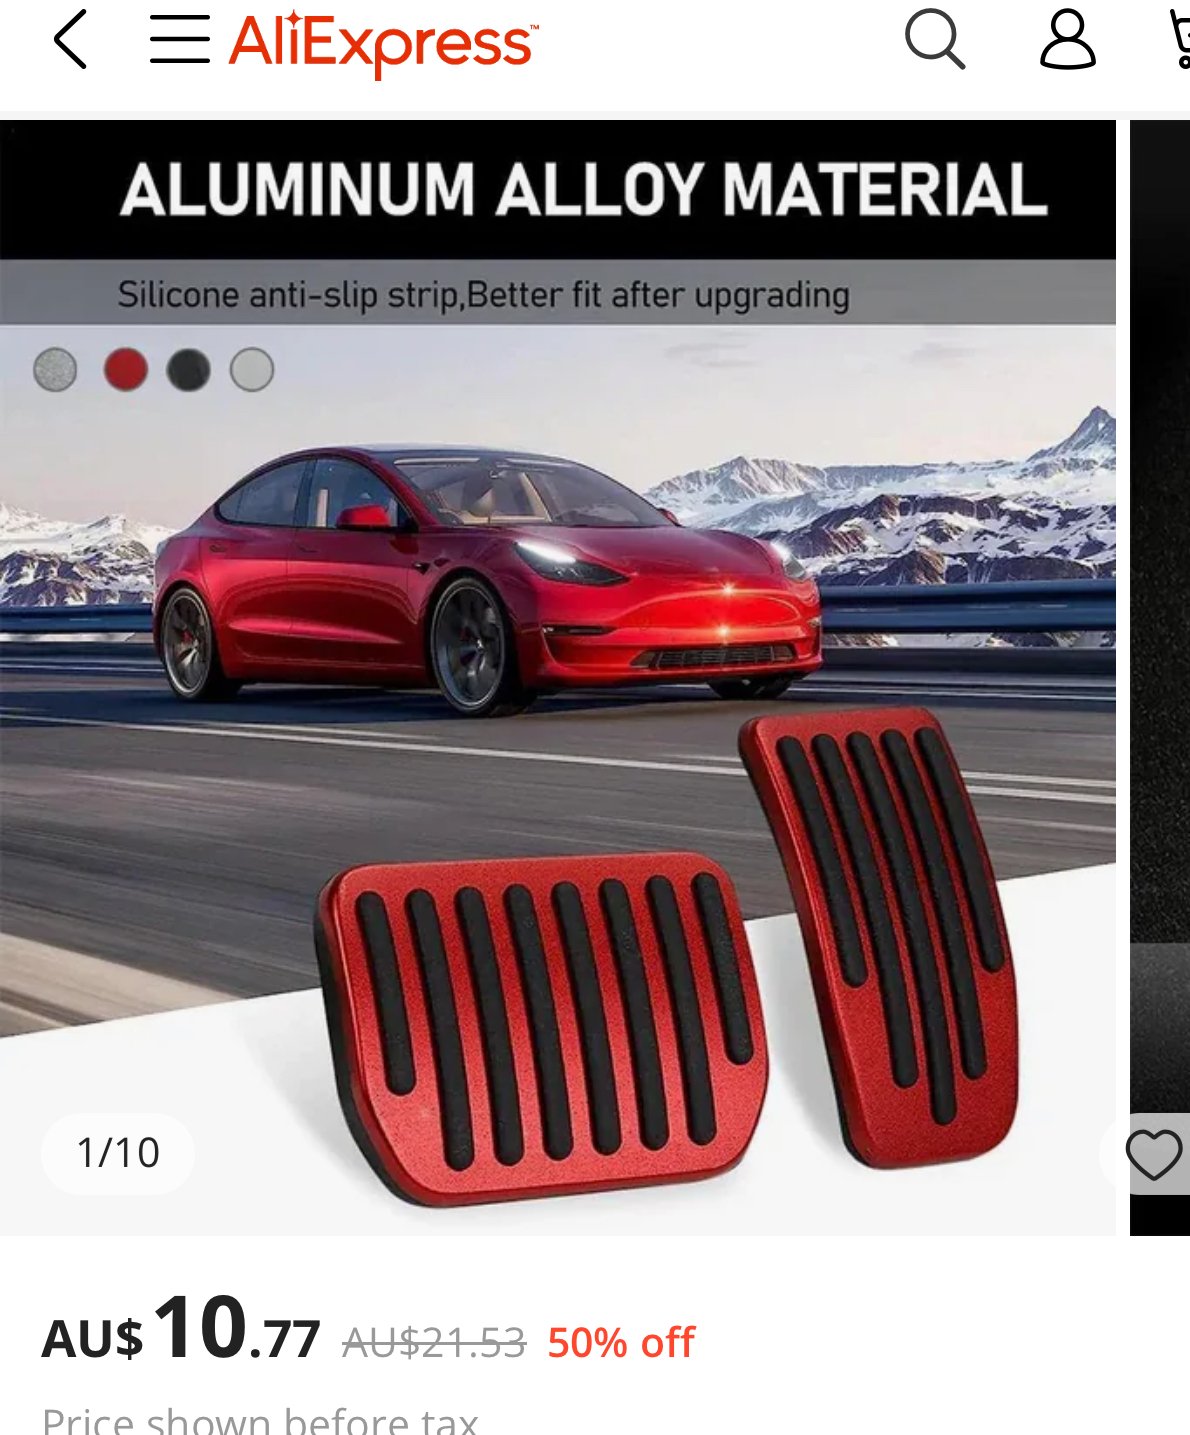 Australian Model 3 highland accessories, Page 2